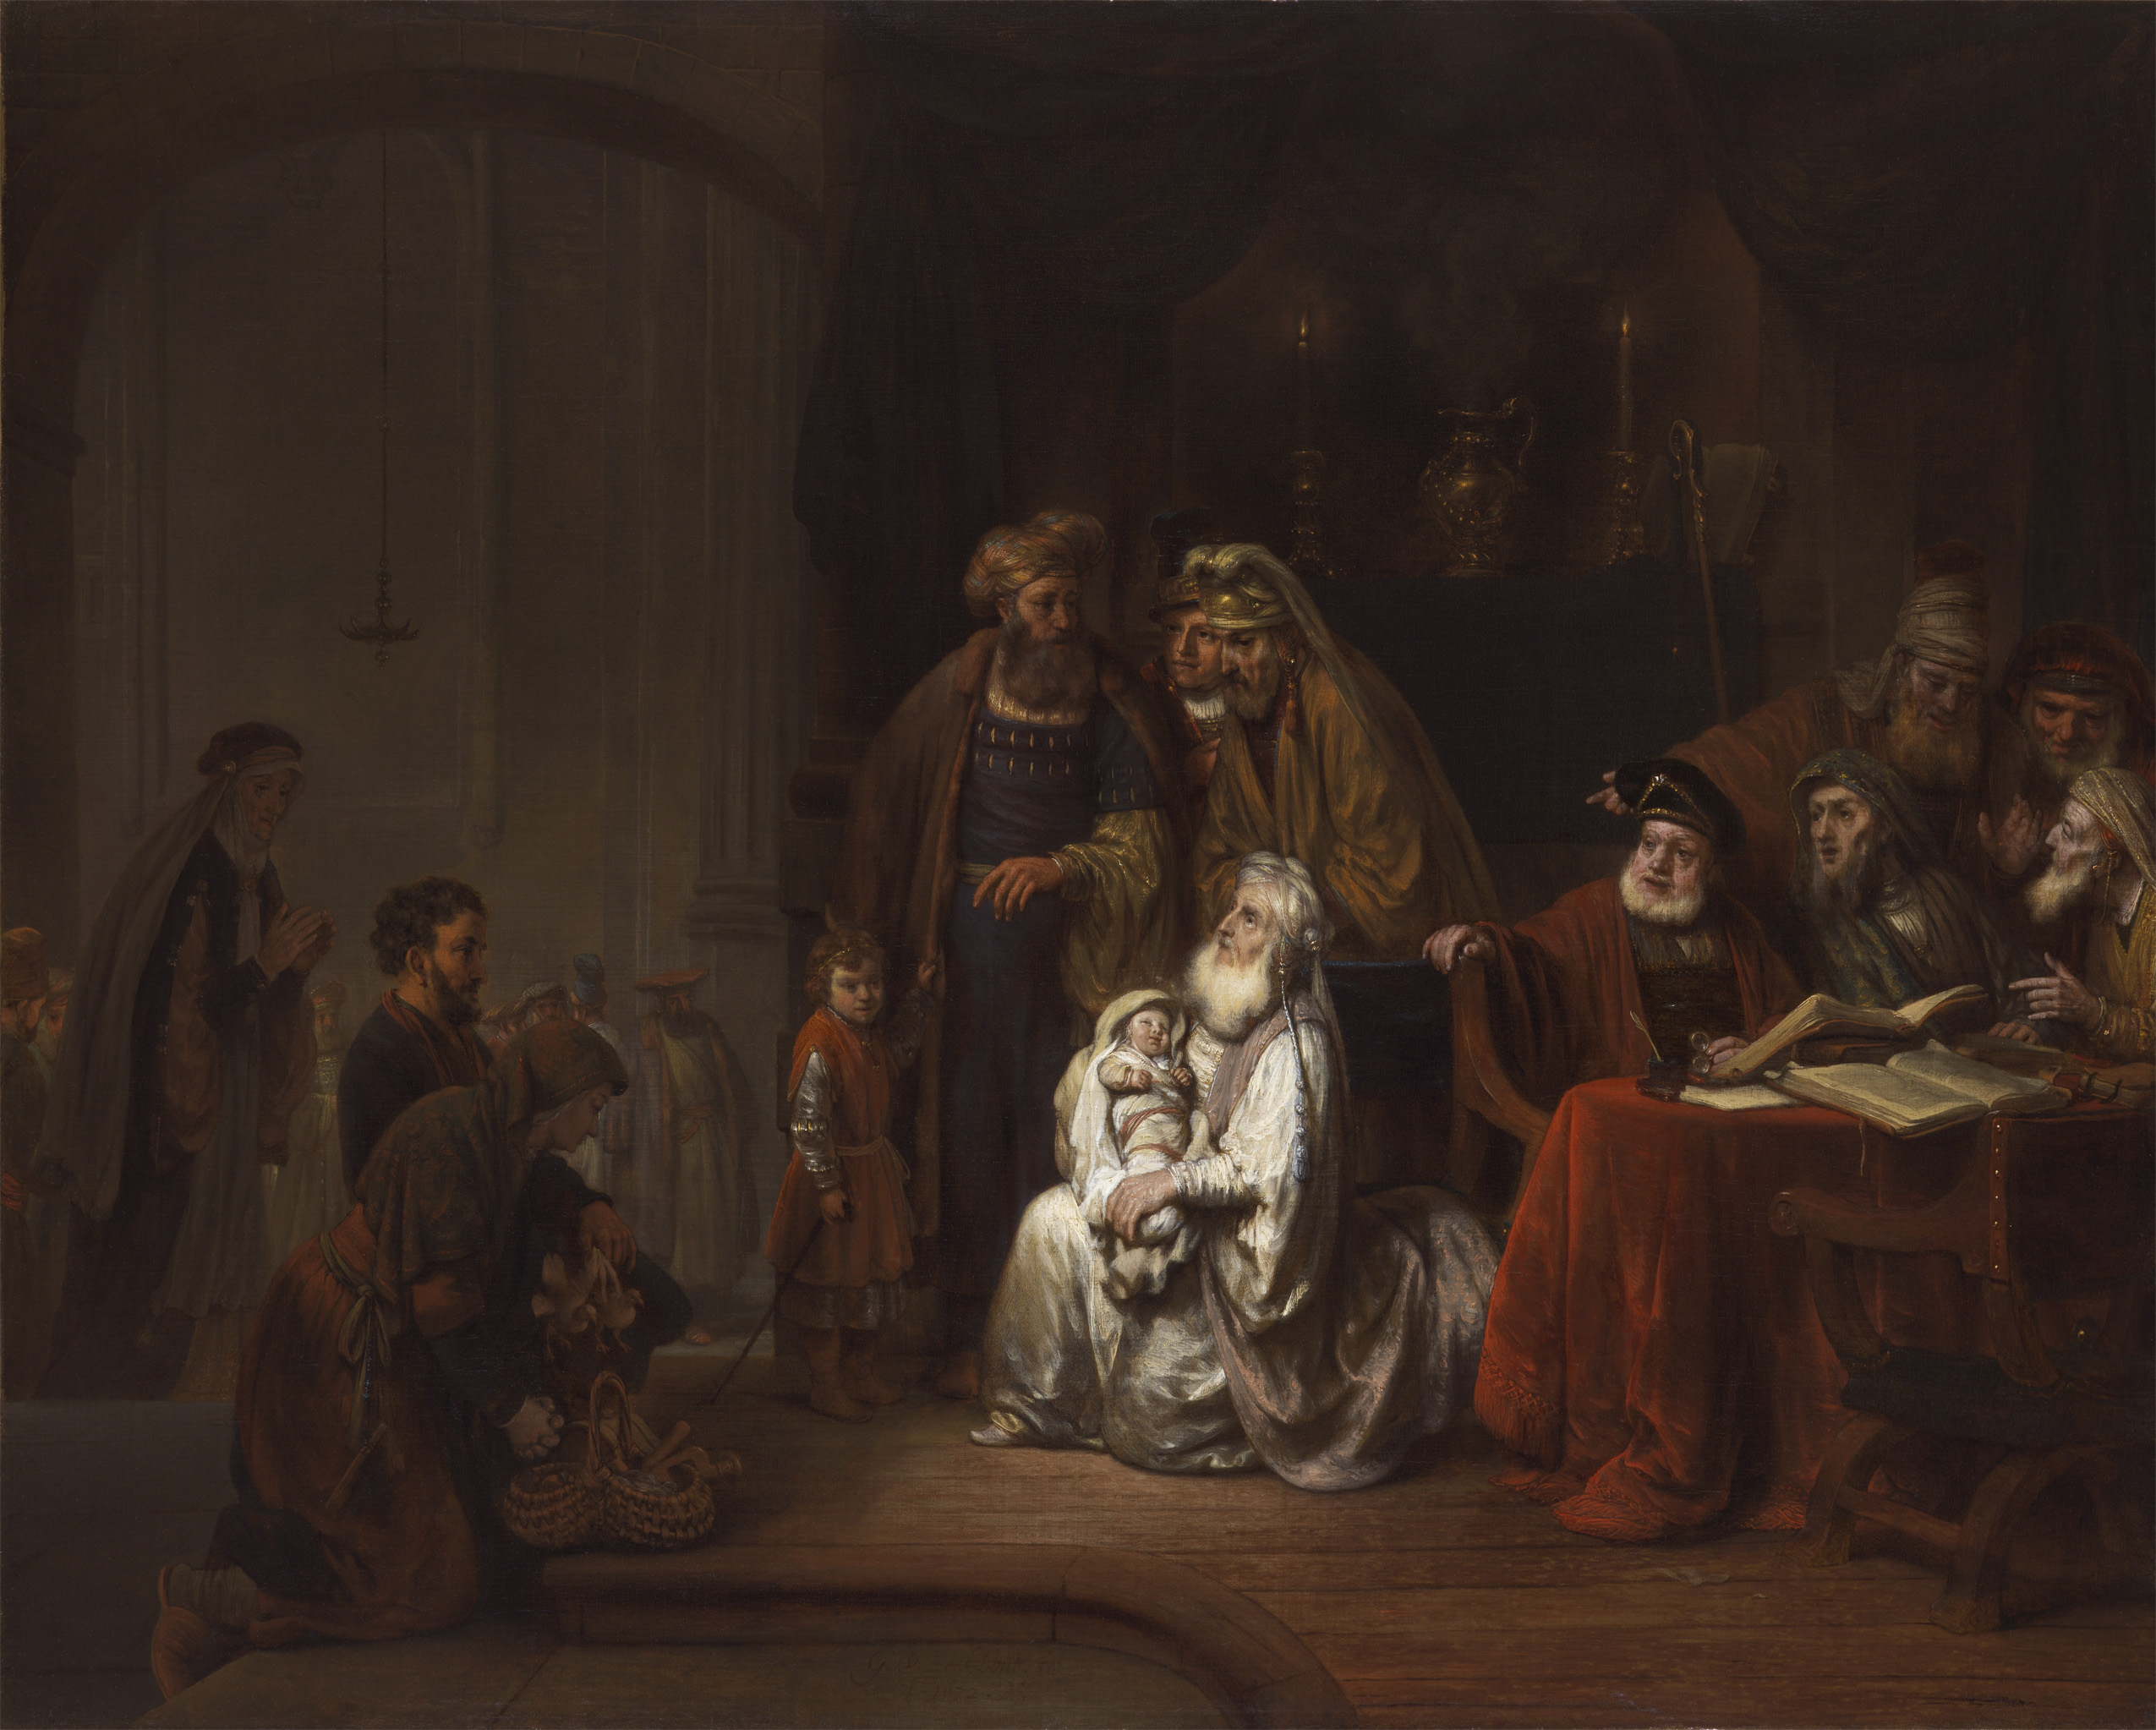 Presentation of the Lord – Candlemas